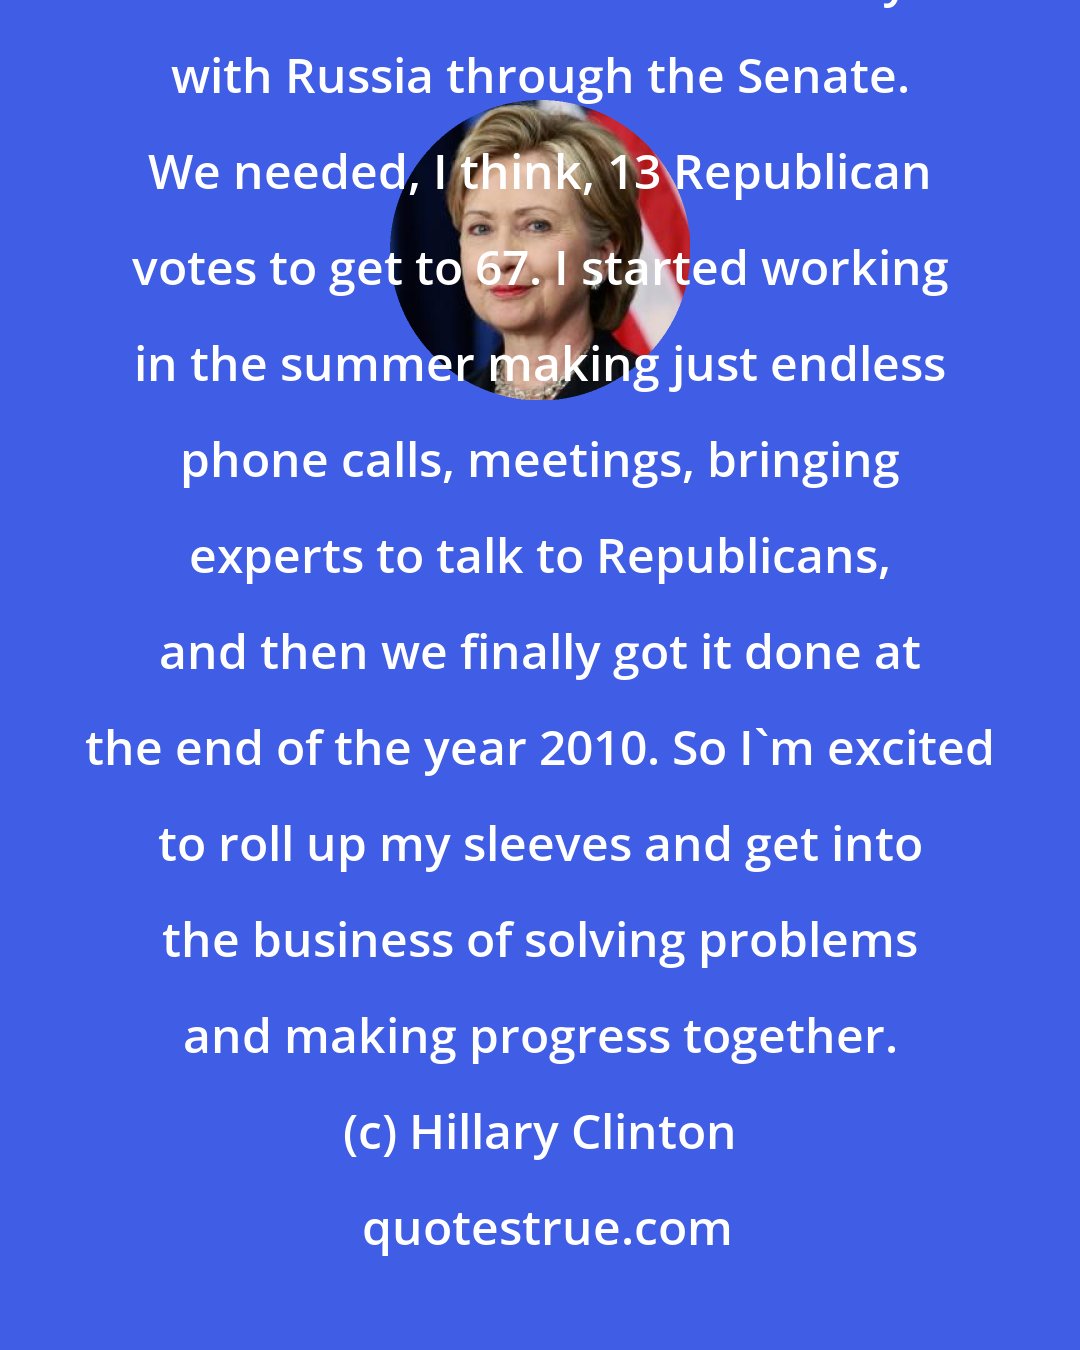 Hillary Clinton: When I was secretary of state, I had to be responsible for getting a nuclear arms reduction treaty with Russia through the Senate. We needed, I think, 13 Republican votes to get to 67. I started working in the summer making just endless phone calls, meetings, bringing experts to talk to Republicans, and then we finally got it done at the end of the year 2010. So I'm excited to roll up my sleeves and get into the business of solving problems and making progress together.